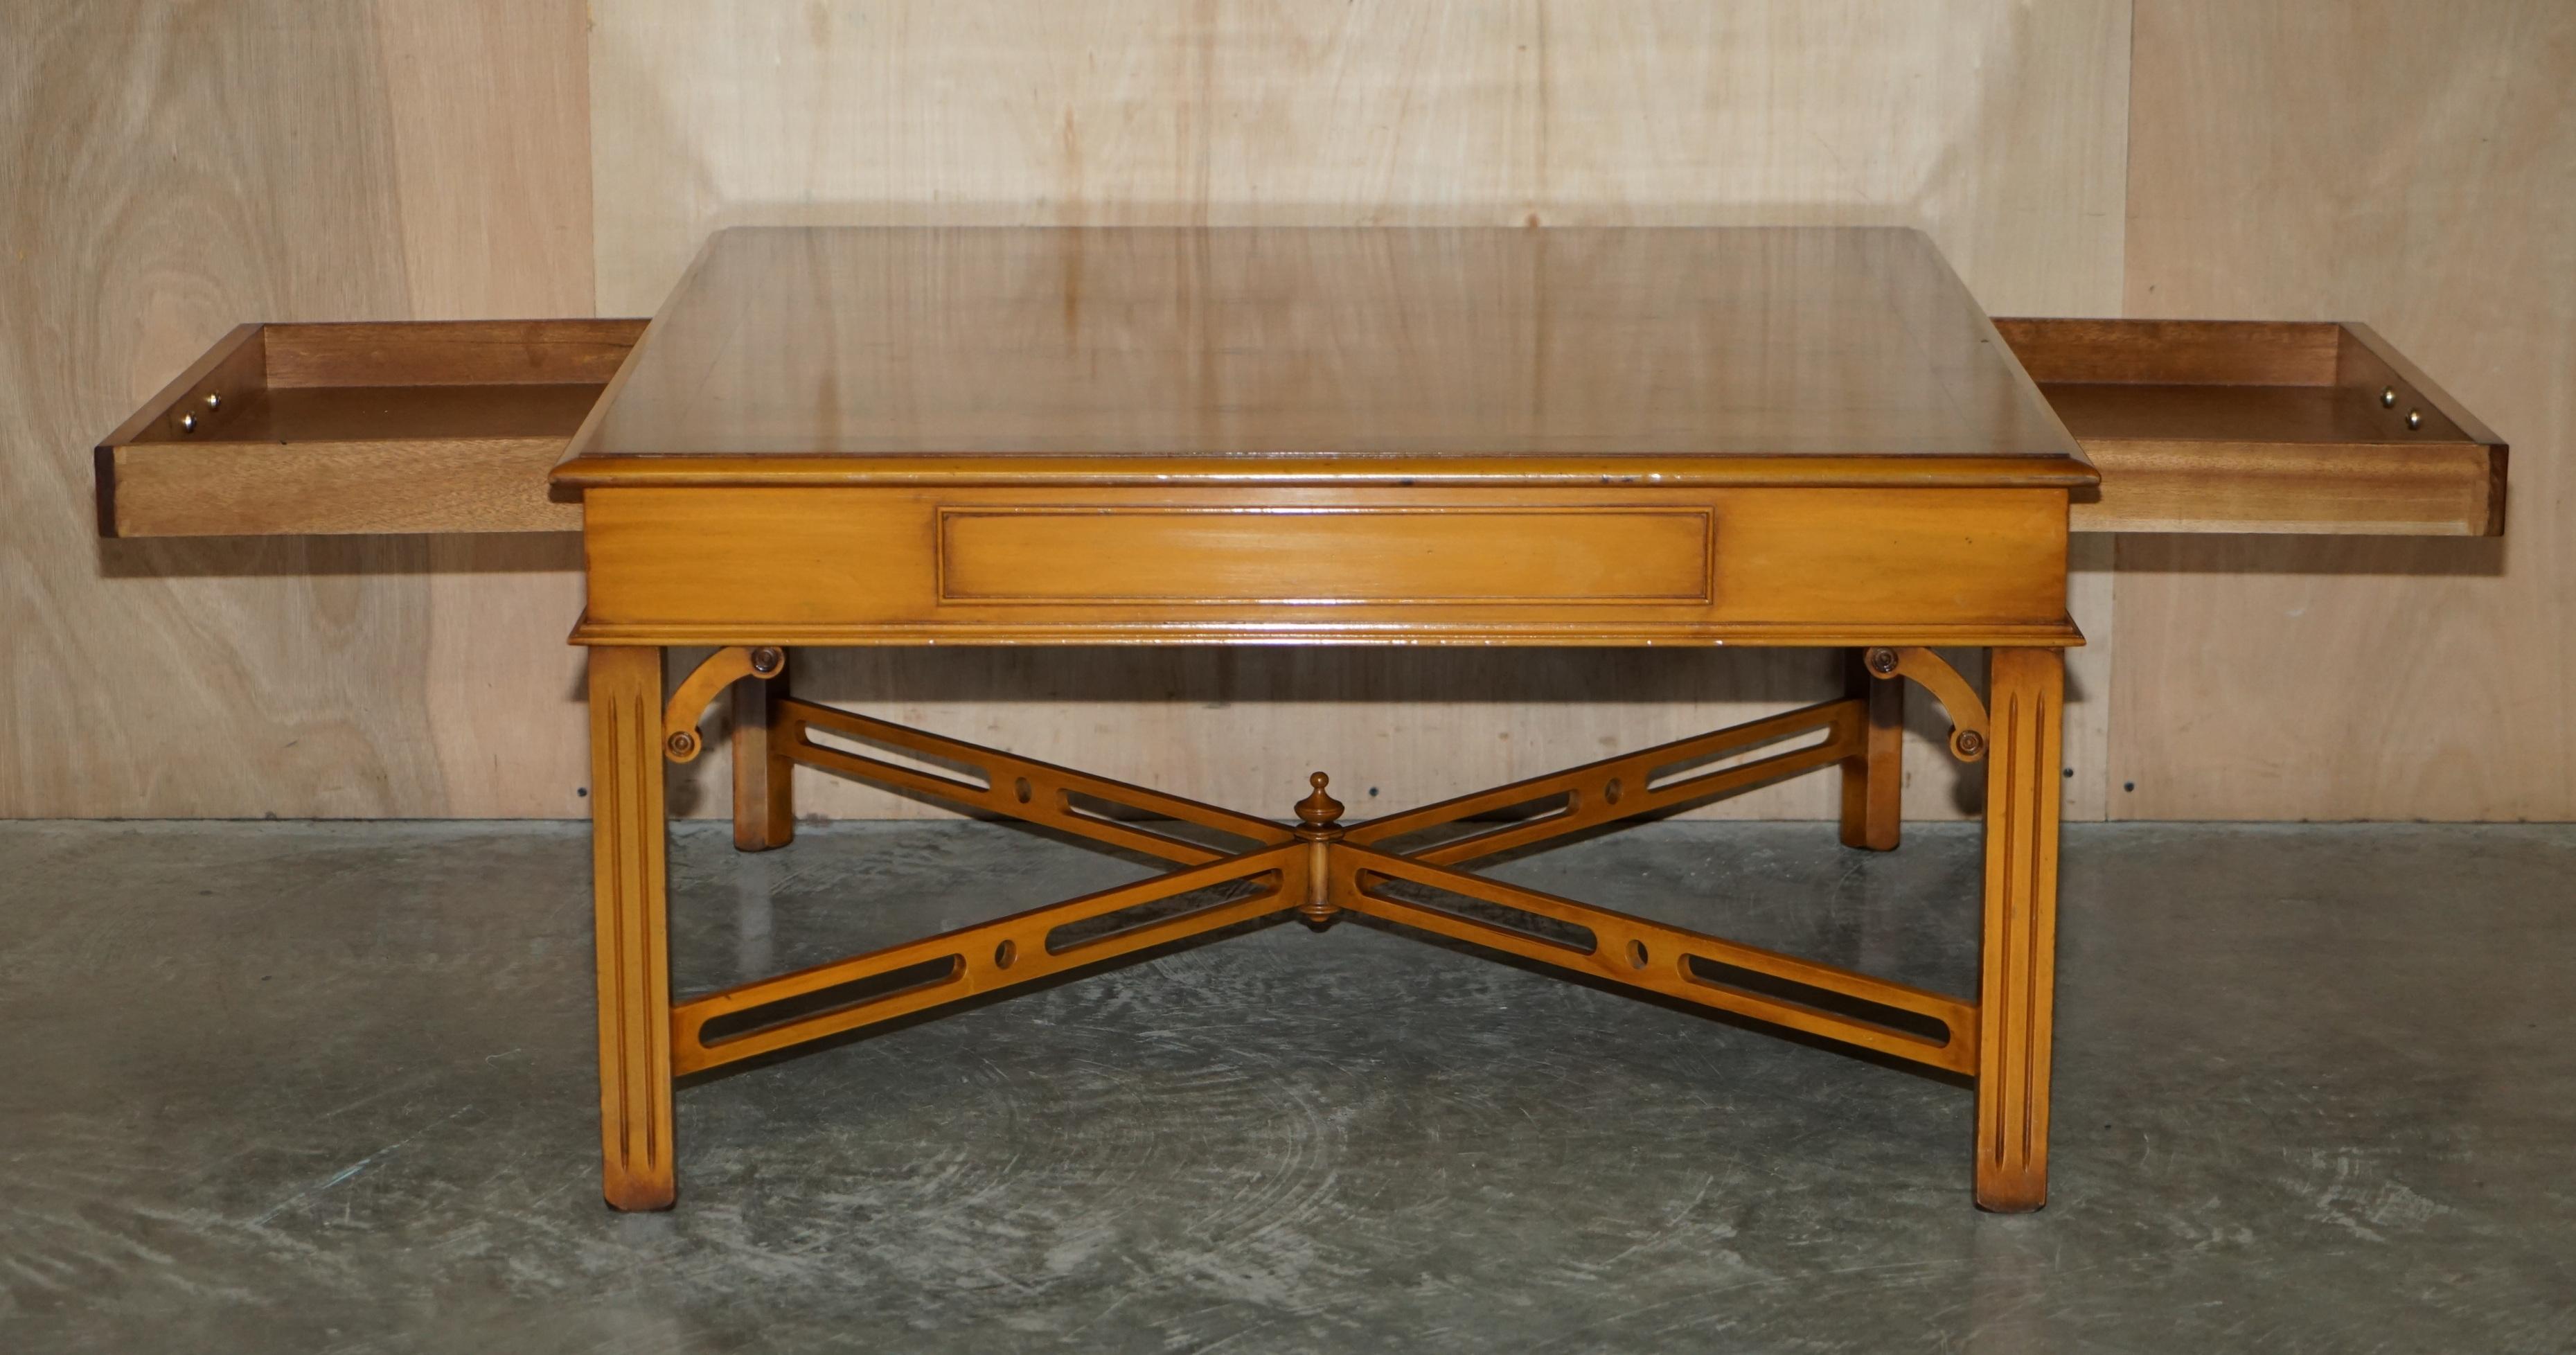 LOVELY BURR YEW WOOD TABLE COFFEE TABLE WiTH THOMAS CHIPPENDALE STRETCHES en vente 11